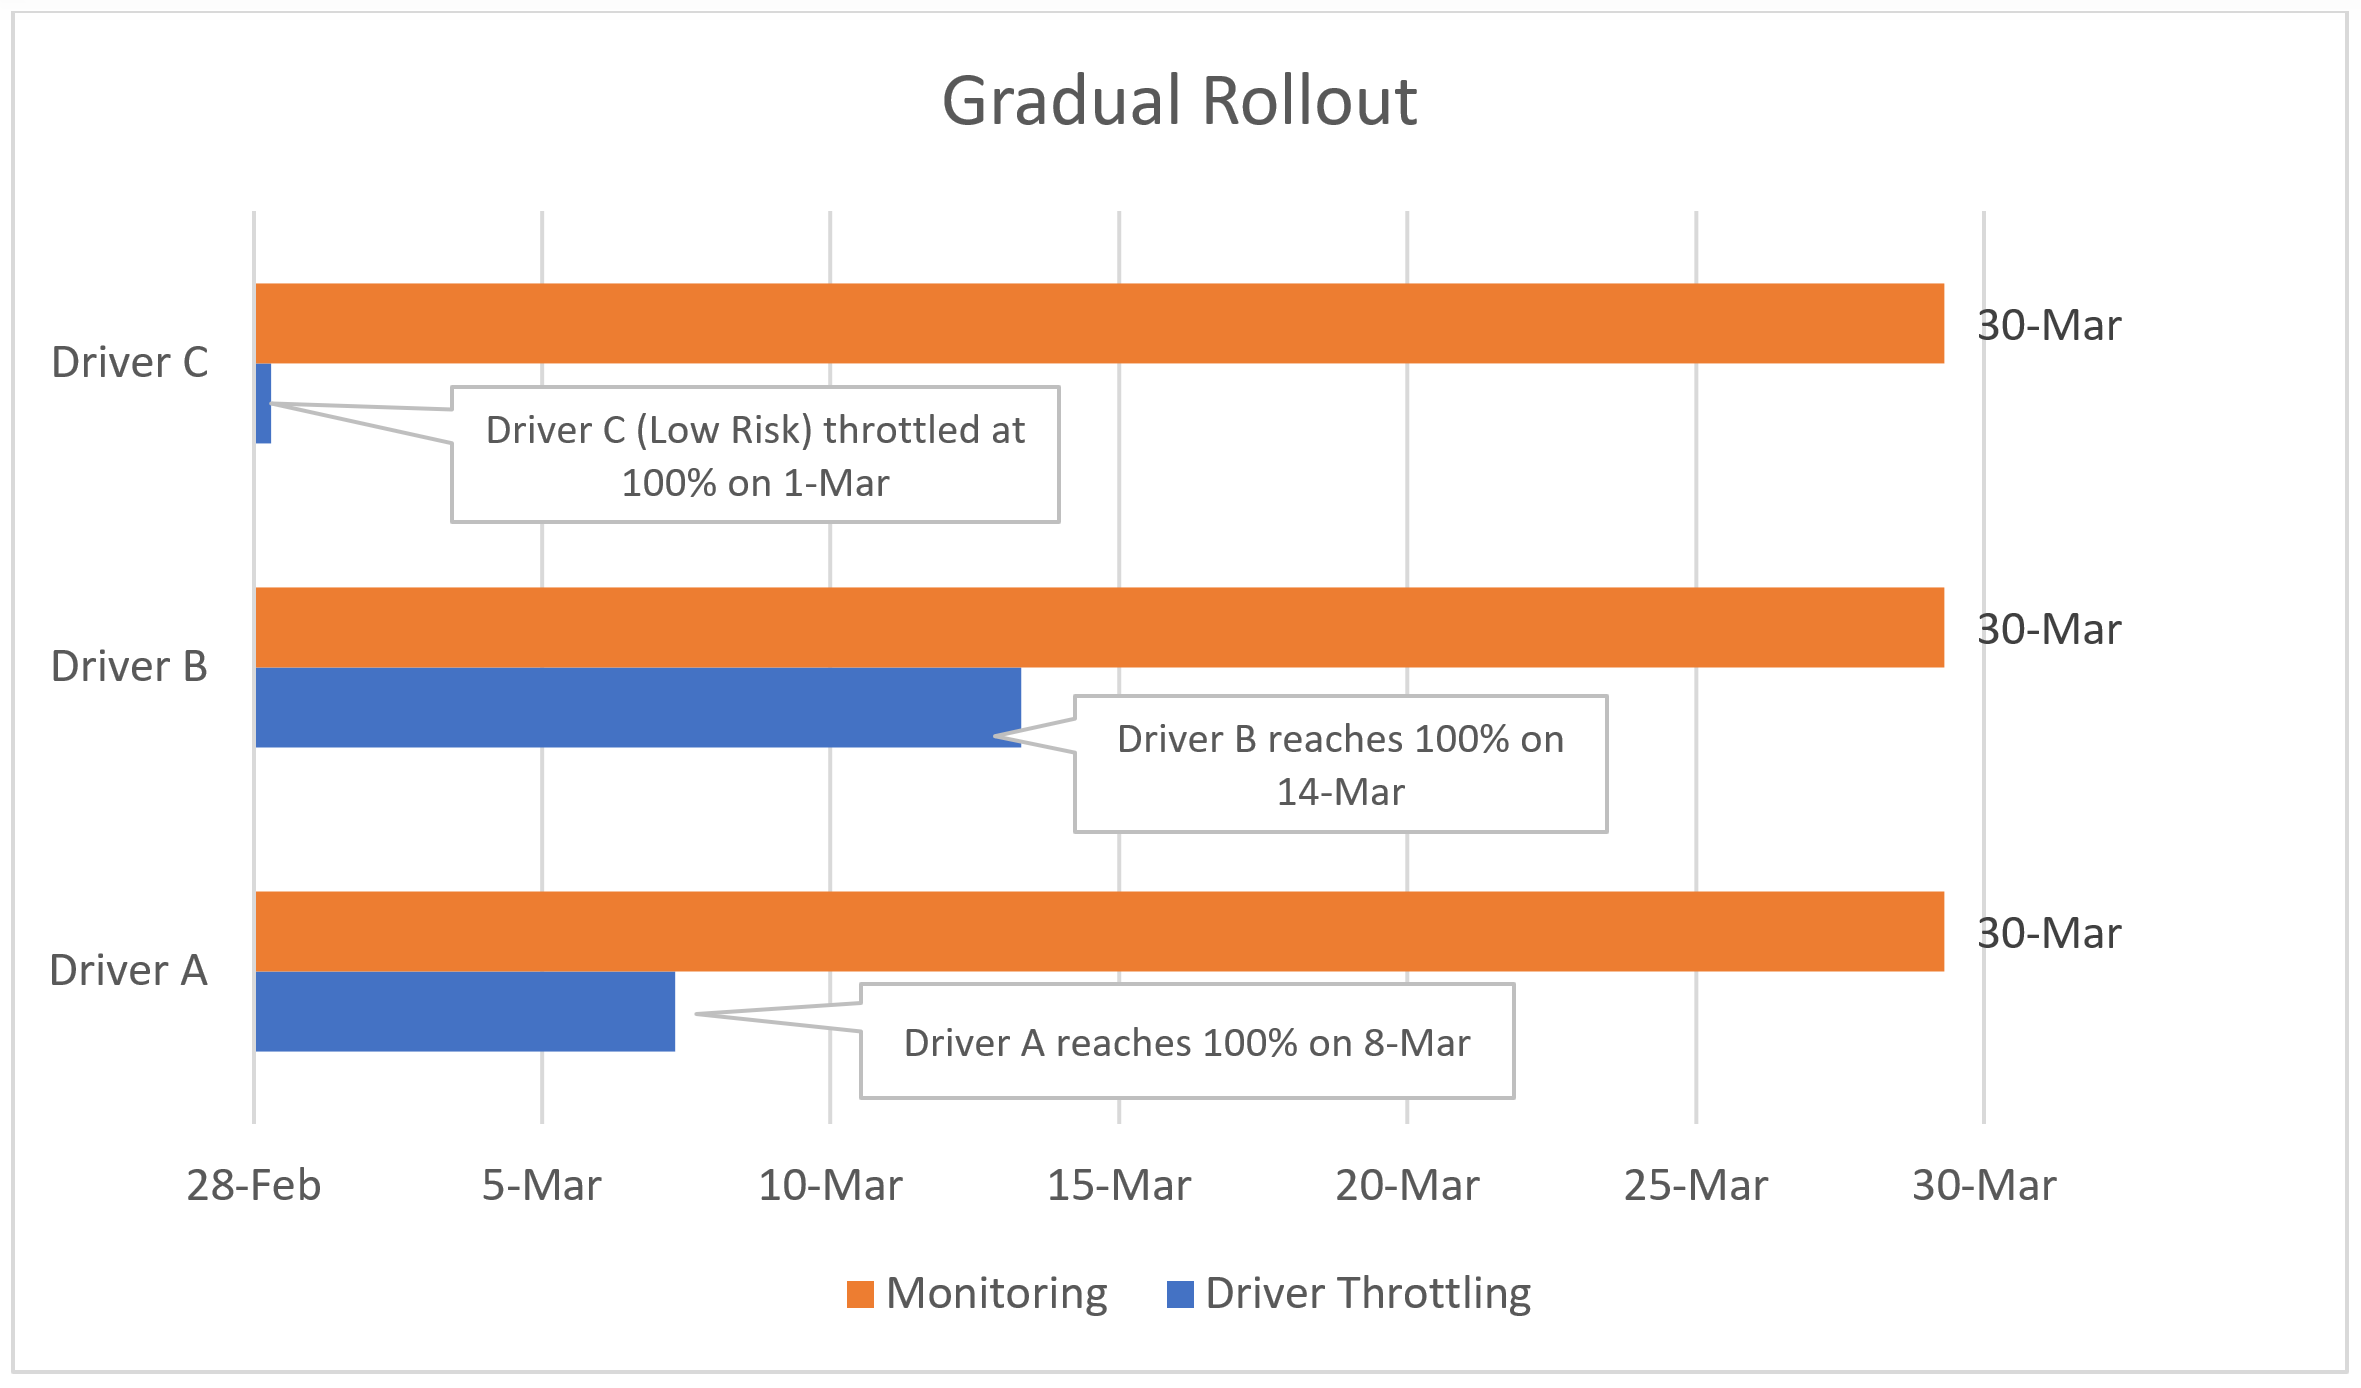 Chart showing the progress of three sample drivers reaching 100% throttled at different rates: 1, 15, and 9 days. All are monitored throughout the 30 day period.